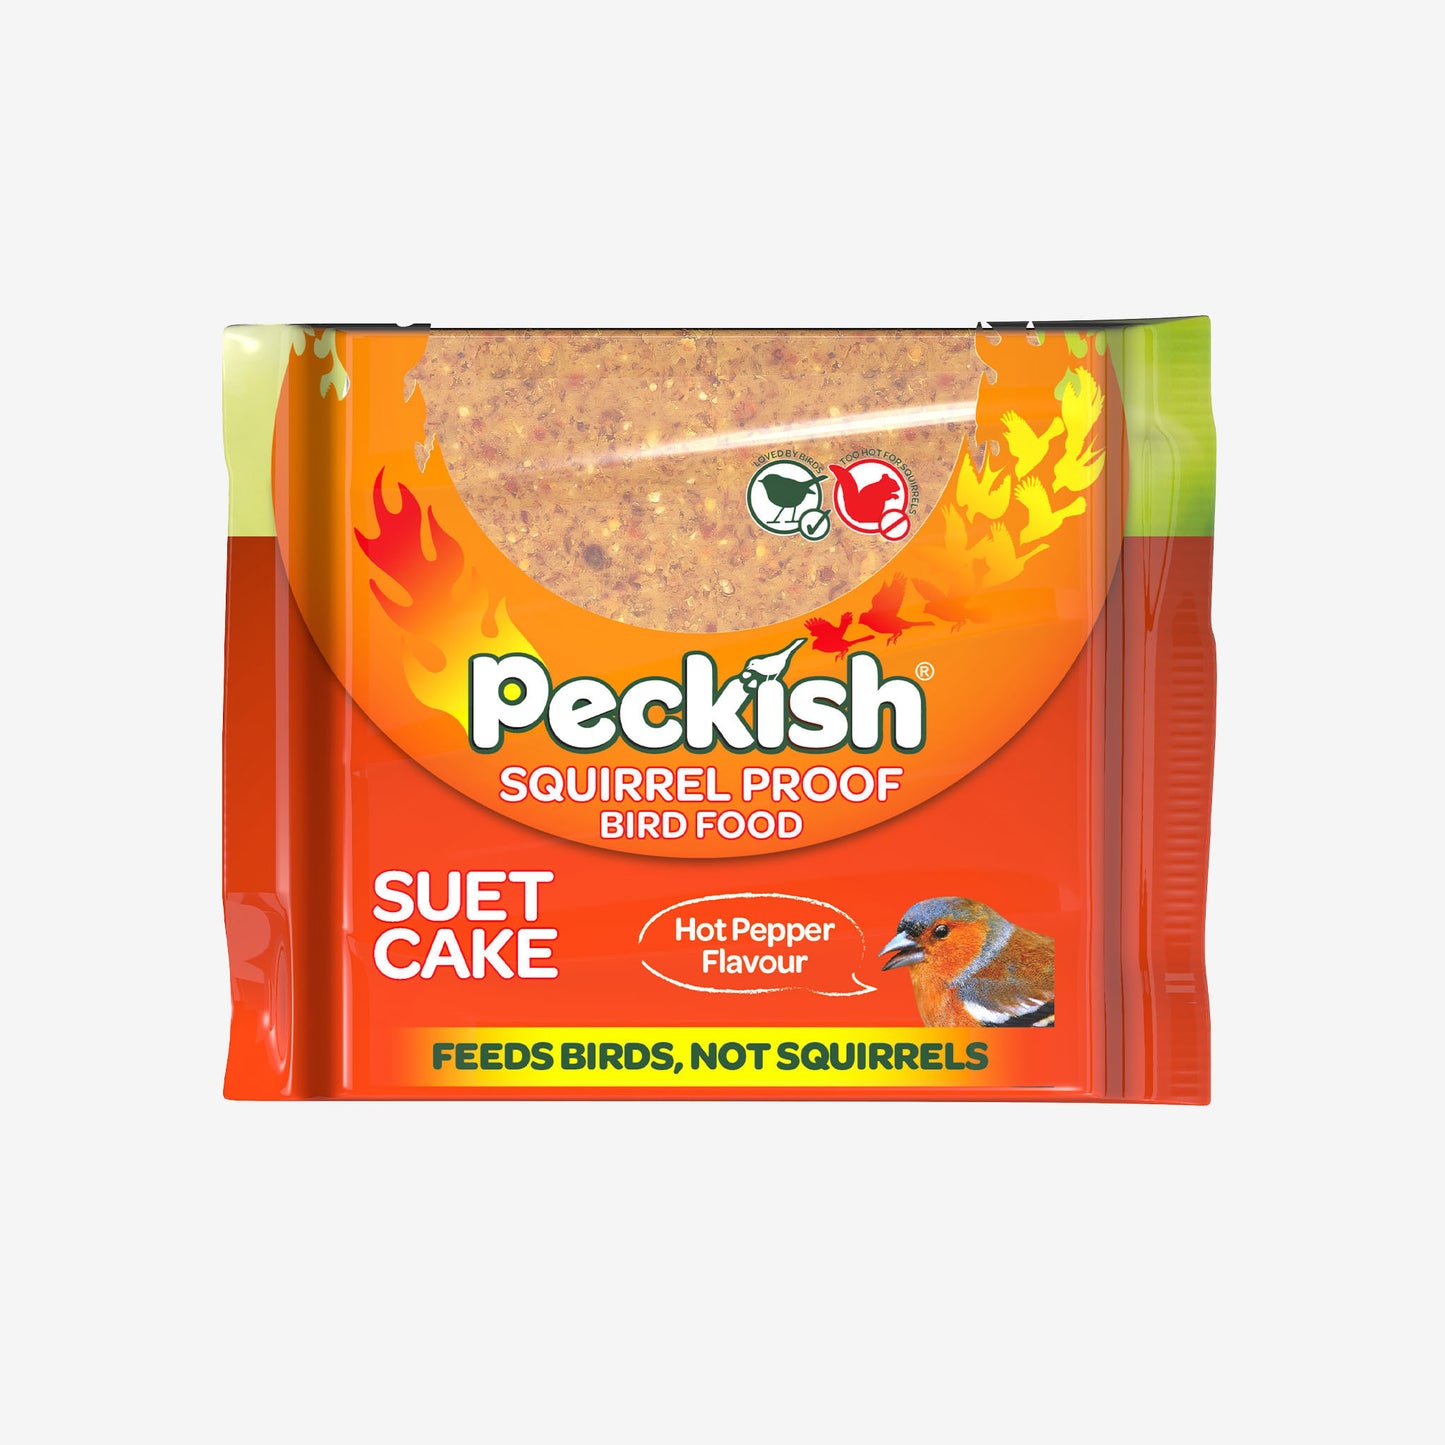 Peckish Squirrel Proof Suet cake front of pack